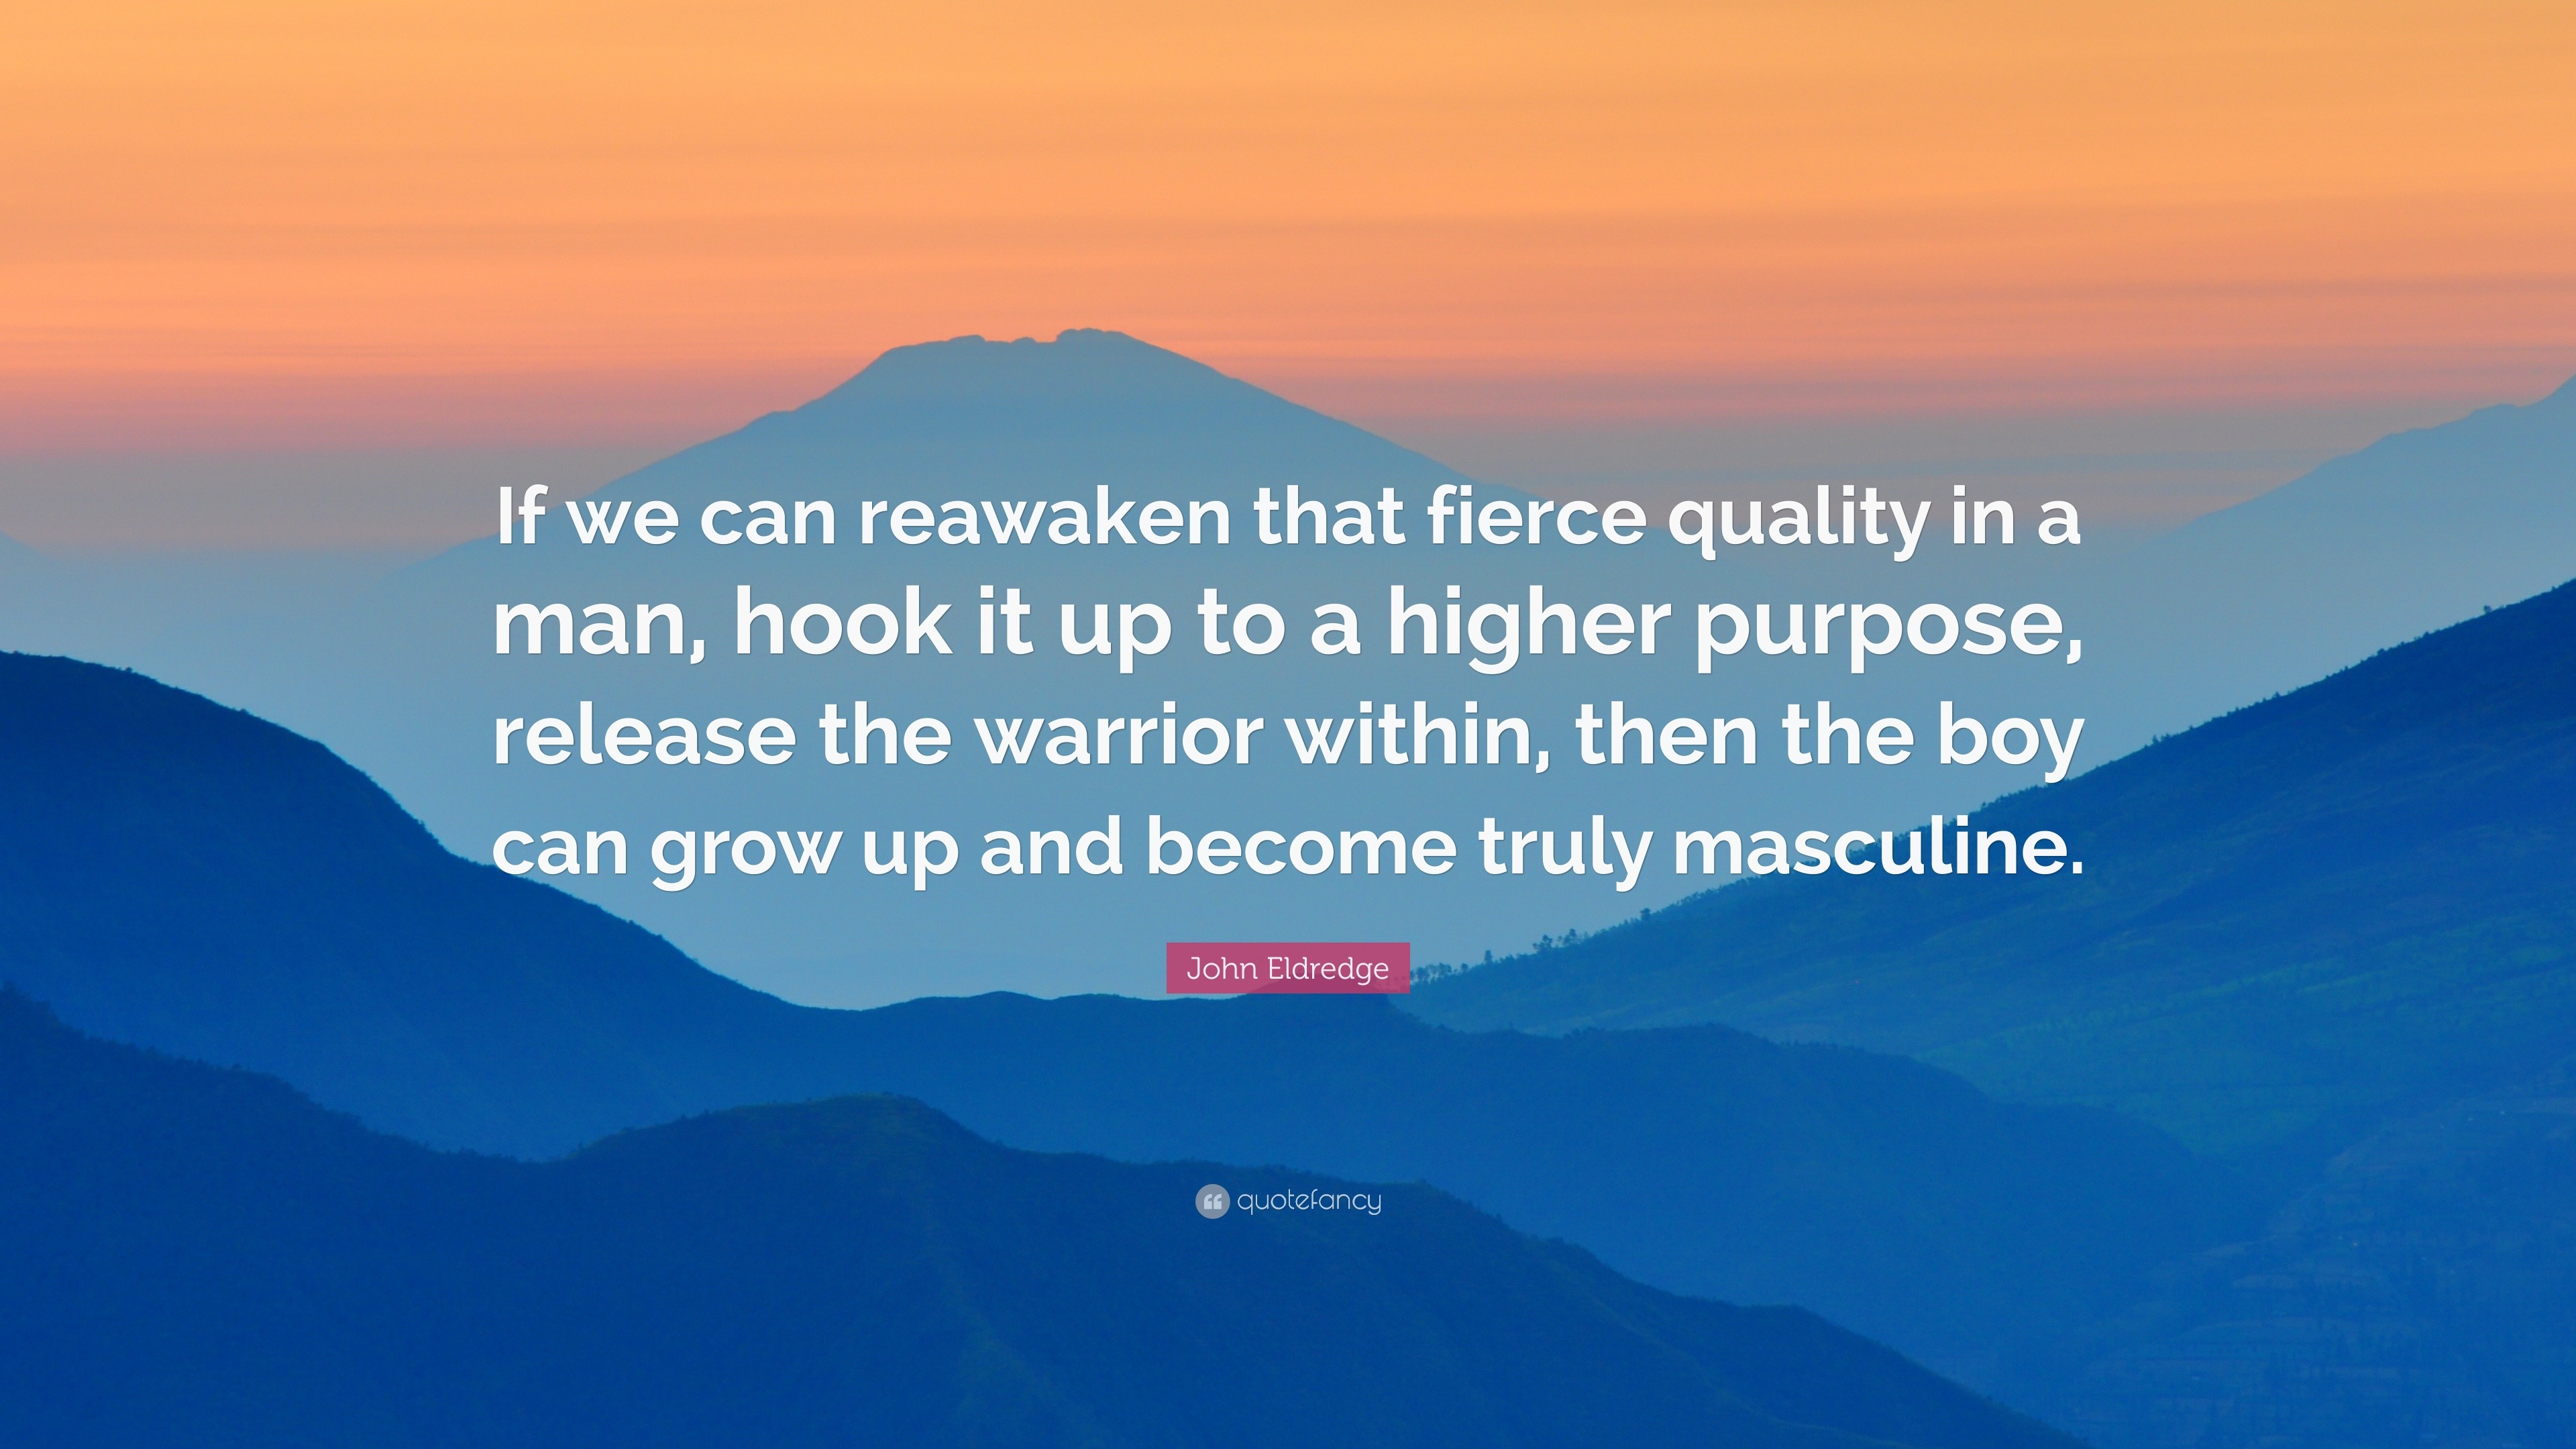 John Eldredge Quote: “If we can reawaken that fierce quality in a man, hook  it up to a higher purpose, release the warrior within, then the bo”